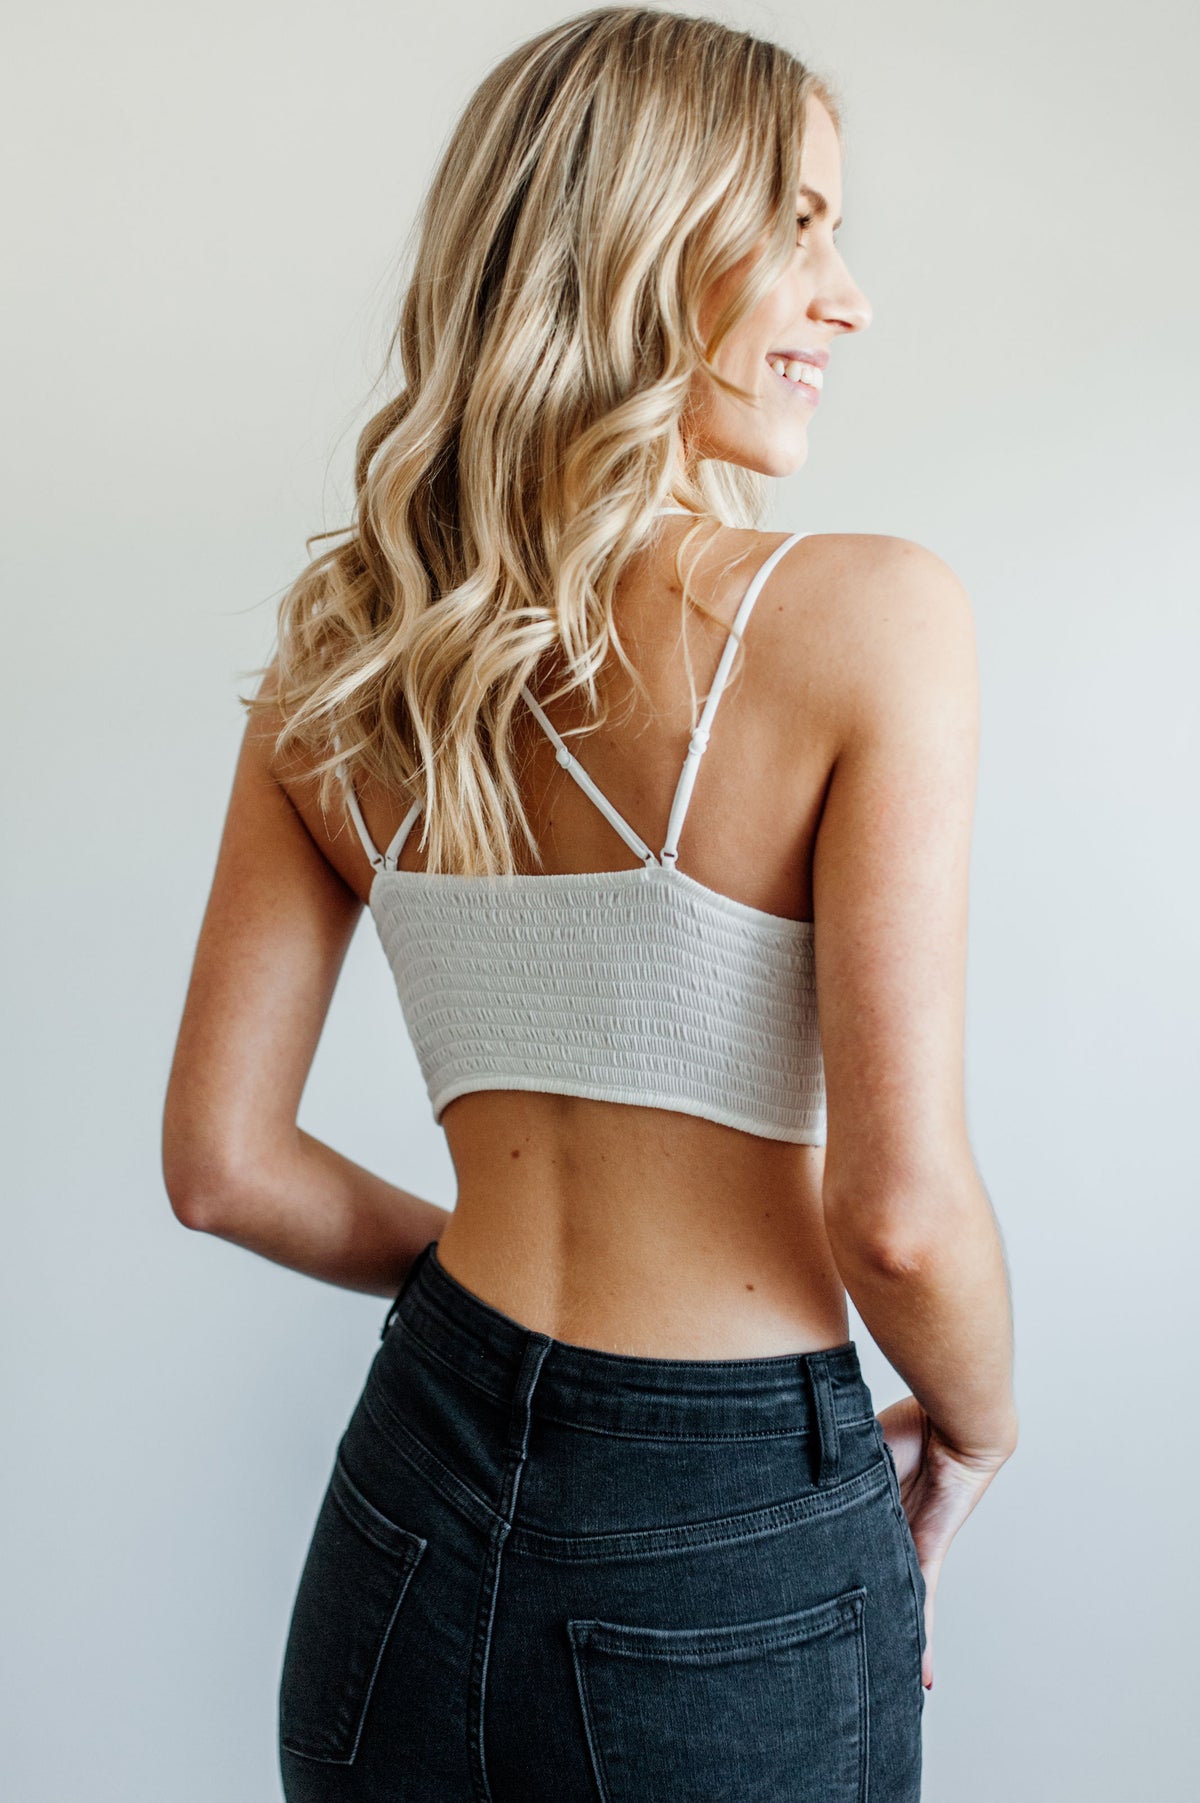 Pictured is a white, lace bralette garment with strappy criss-cross shoulder straps, ruched backing, padded cups, and cropped style.